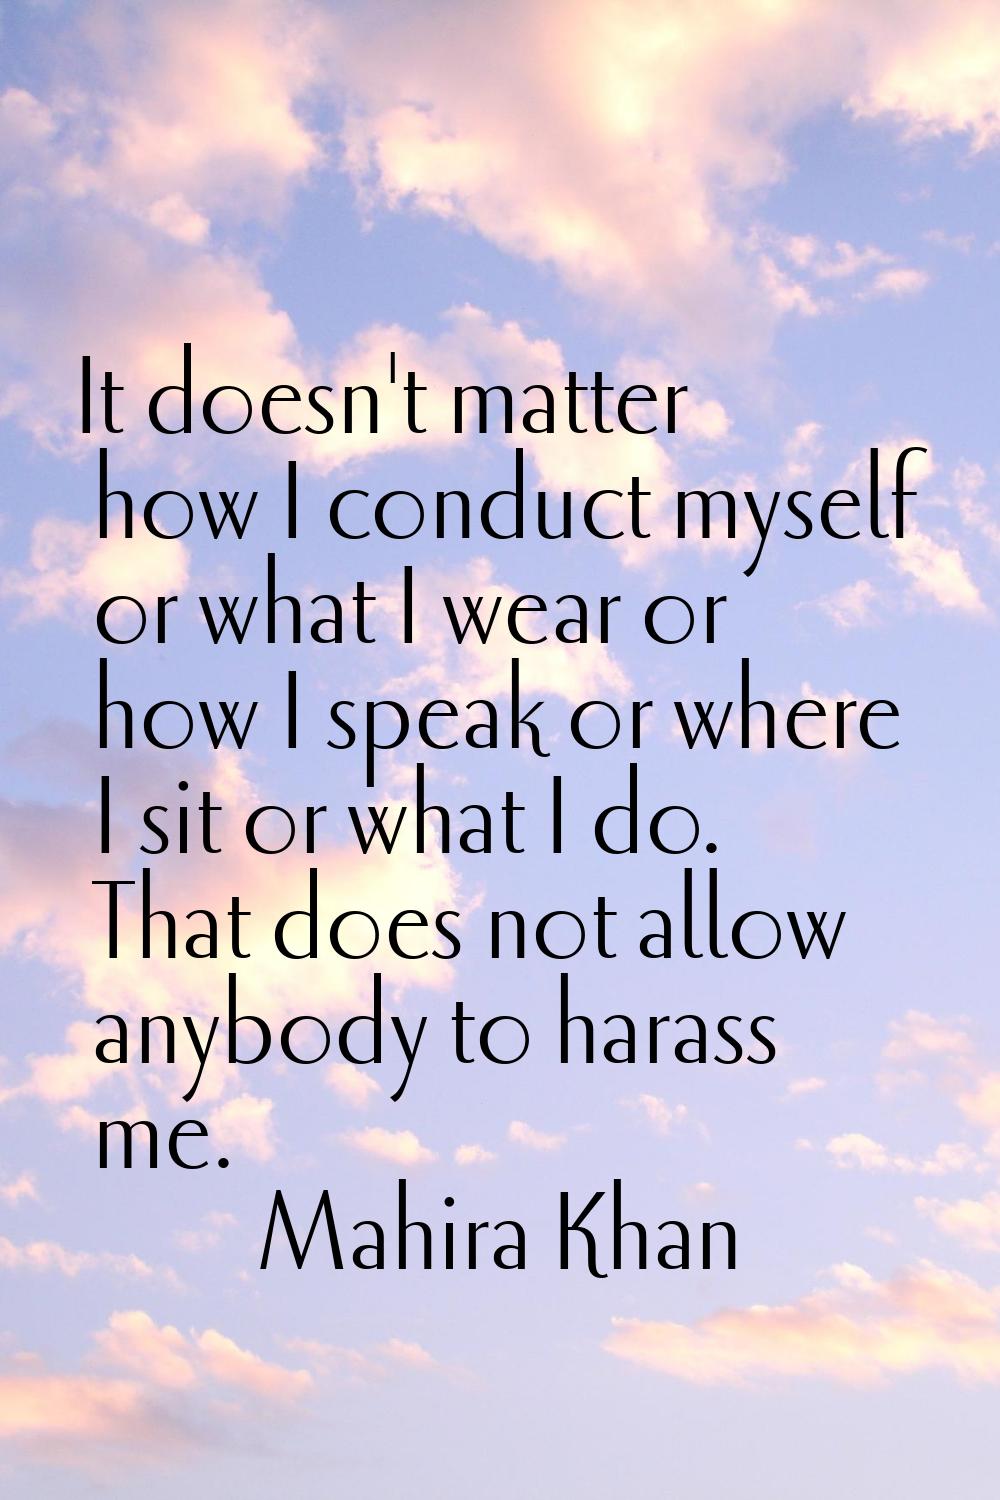 It doesn't matter how I conduct myself or what I wear or how I speak or where I sit or what I do. T